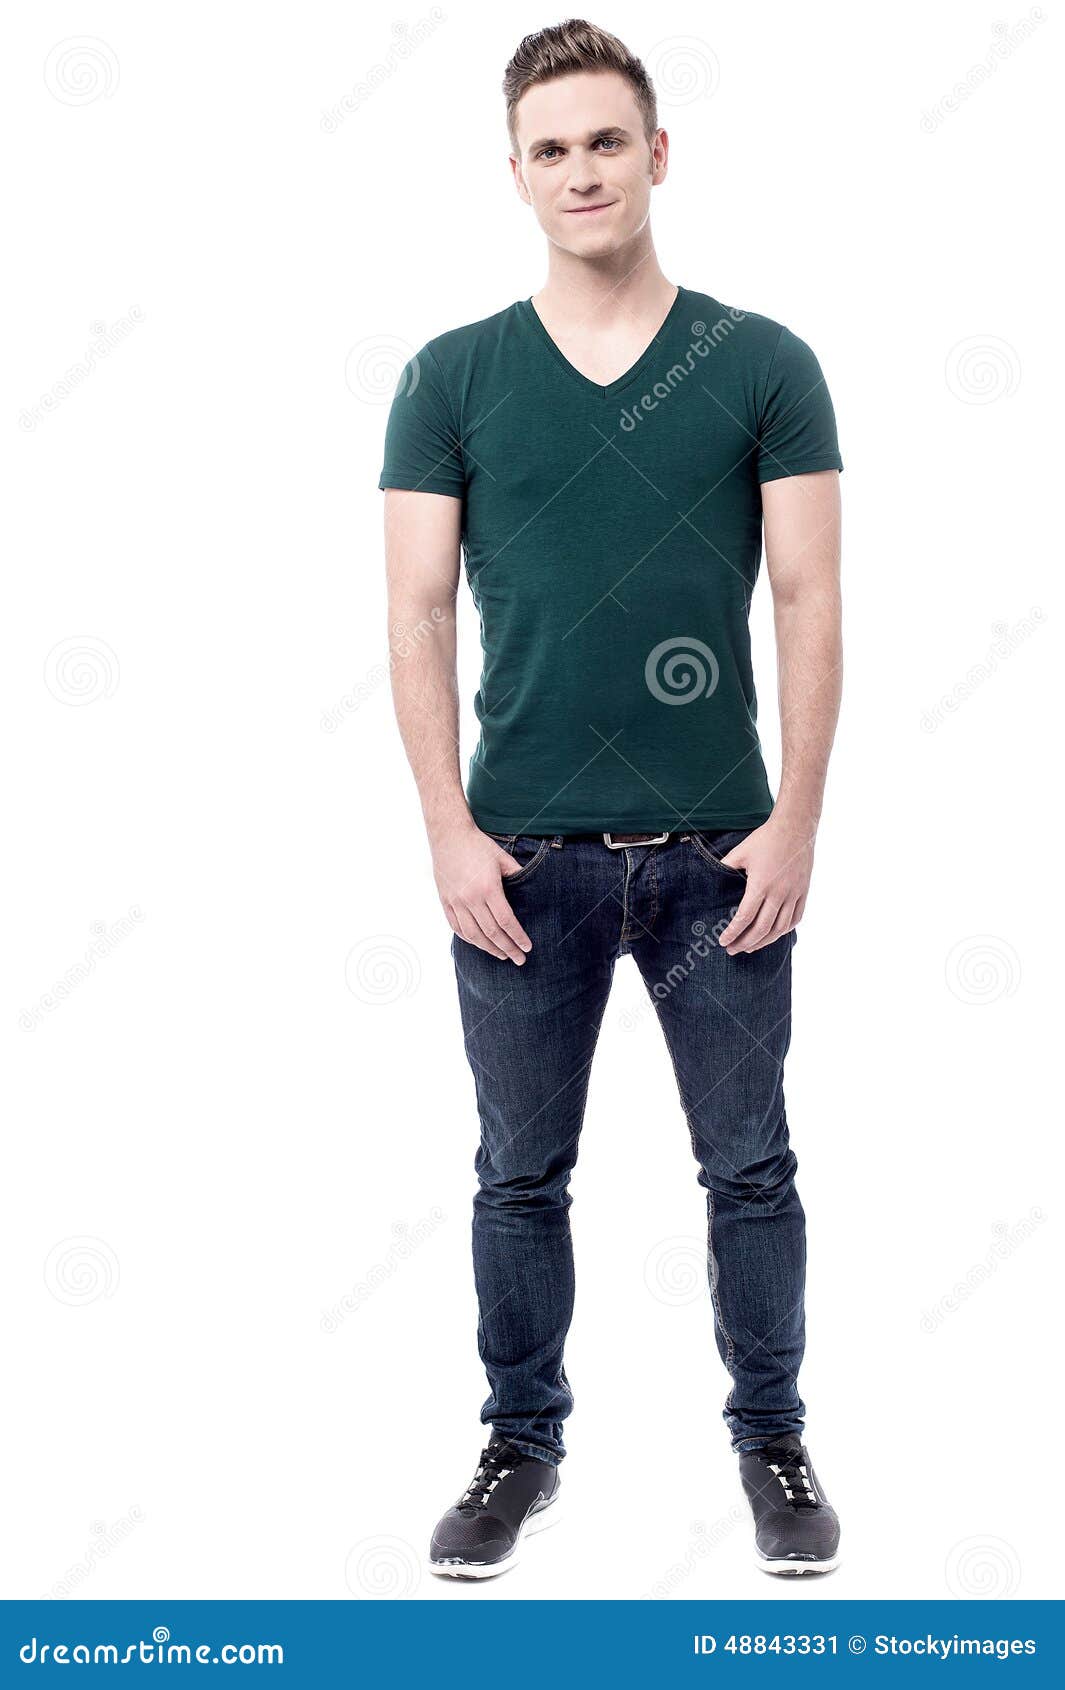 Smart Young Man Posing in Style Stock Image - Image of standing, model ...